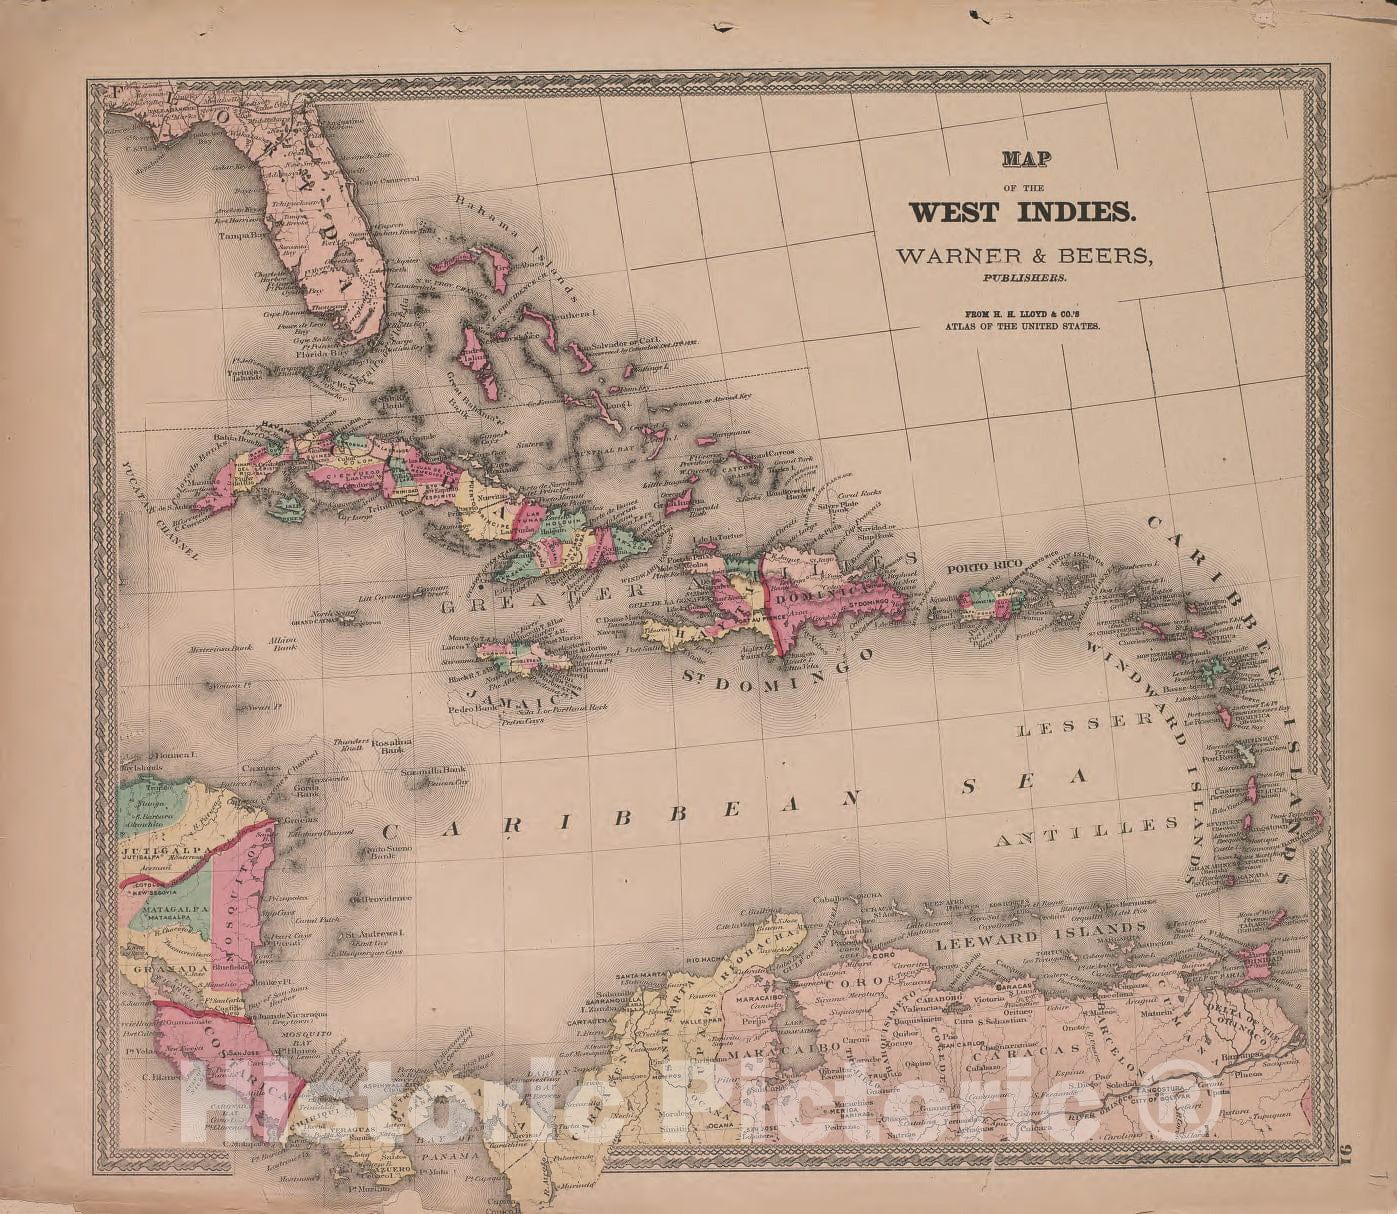 Historic 1870 Map - Atlas of Marshall Co. and The State of Illinois - Map of West Indies - Atlas of Marshall County and The State of Illinois